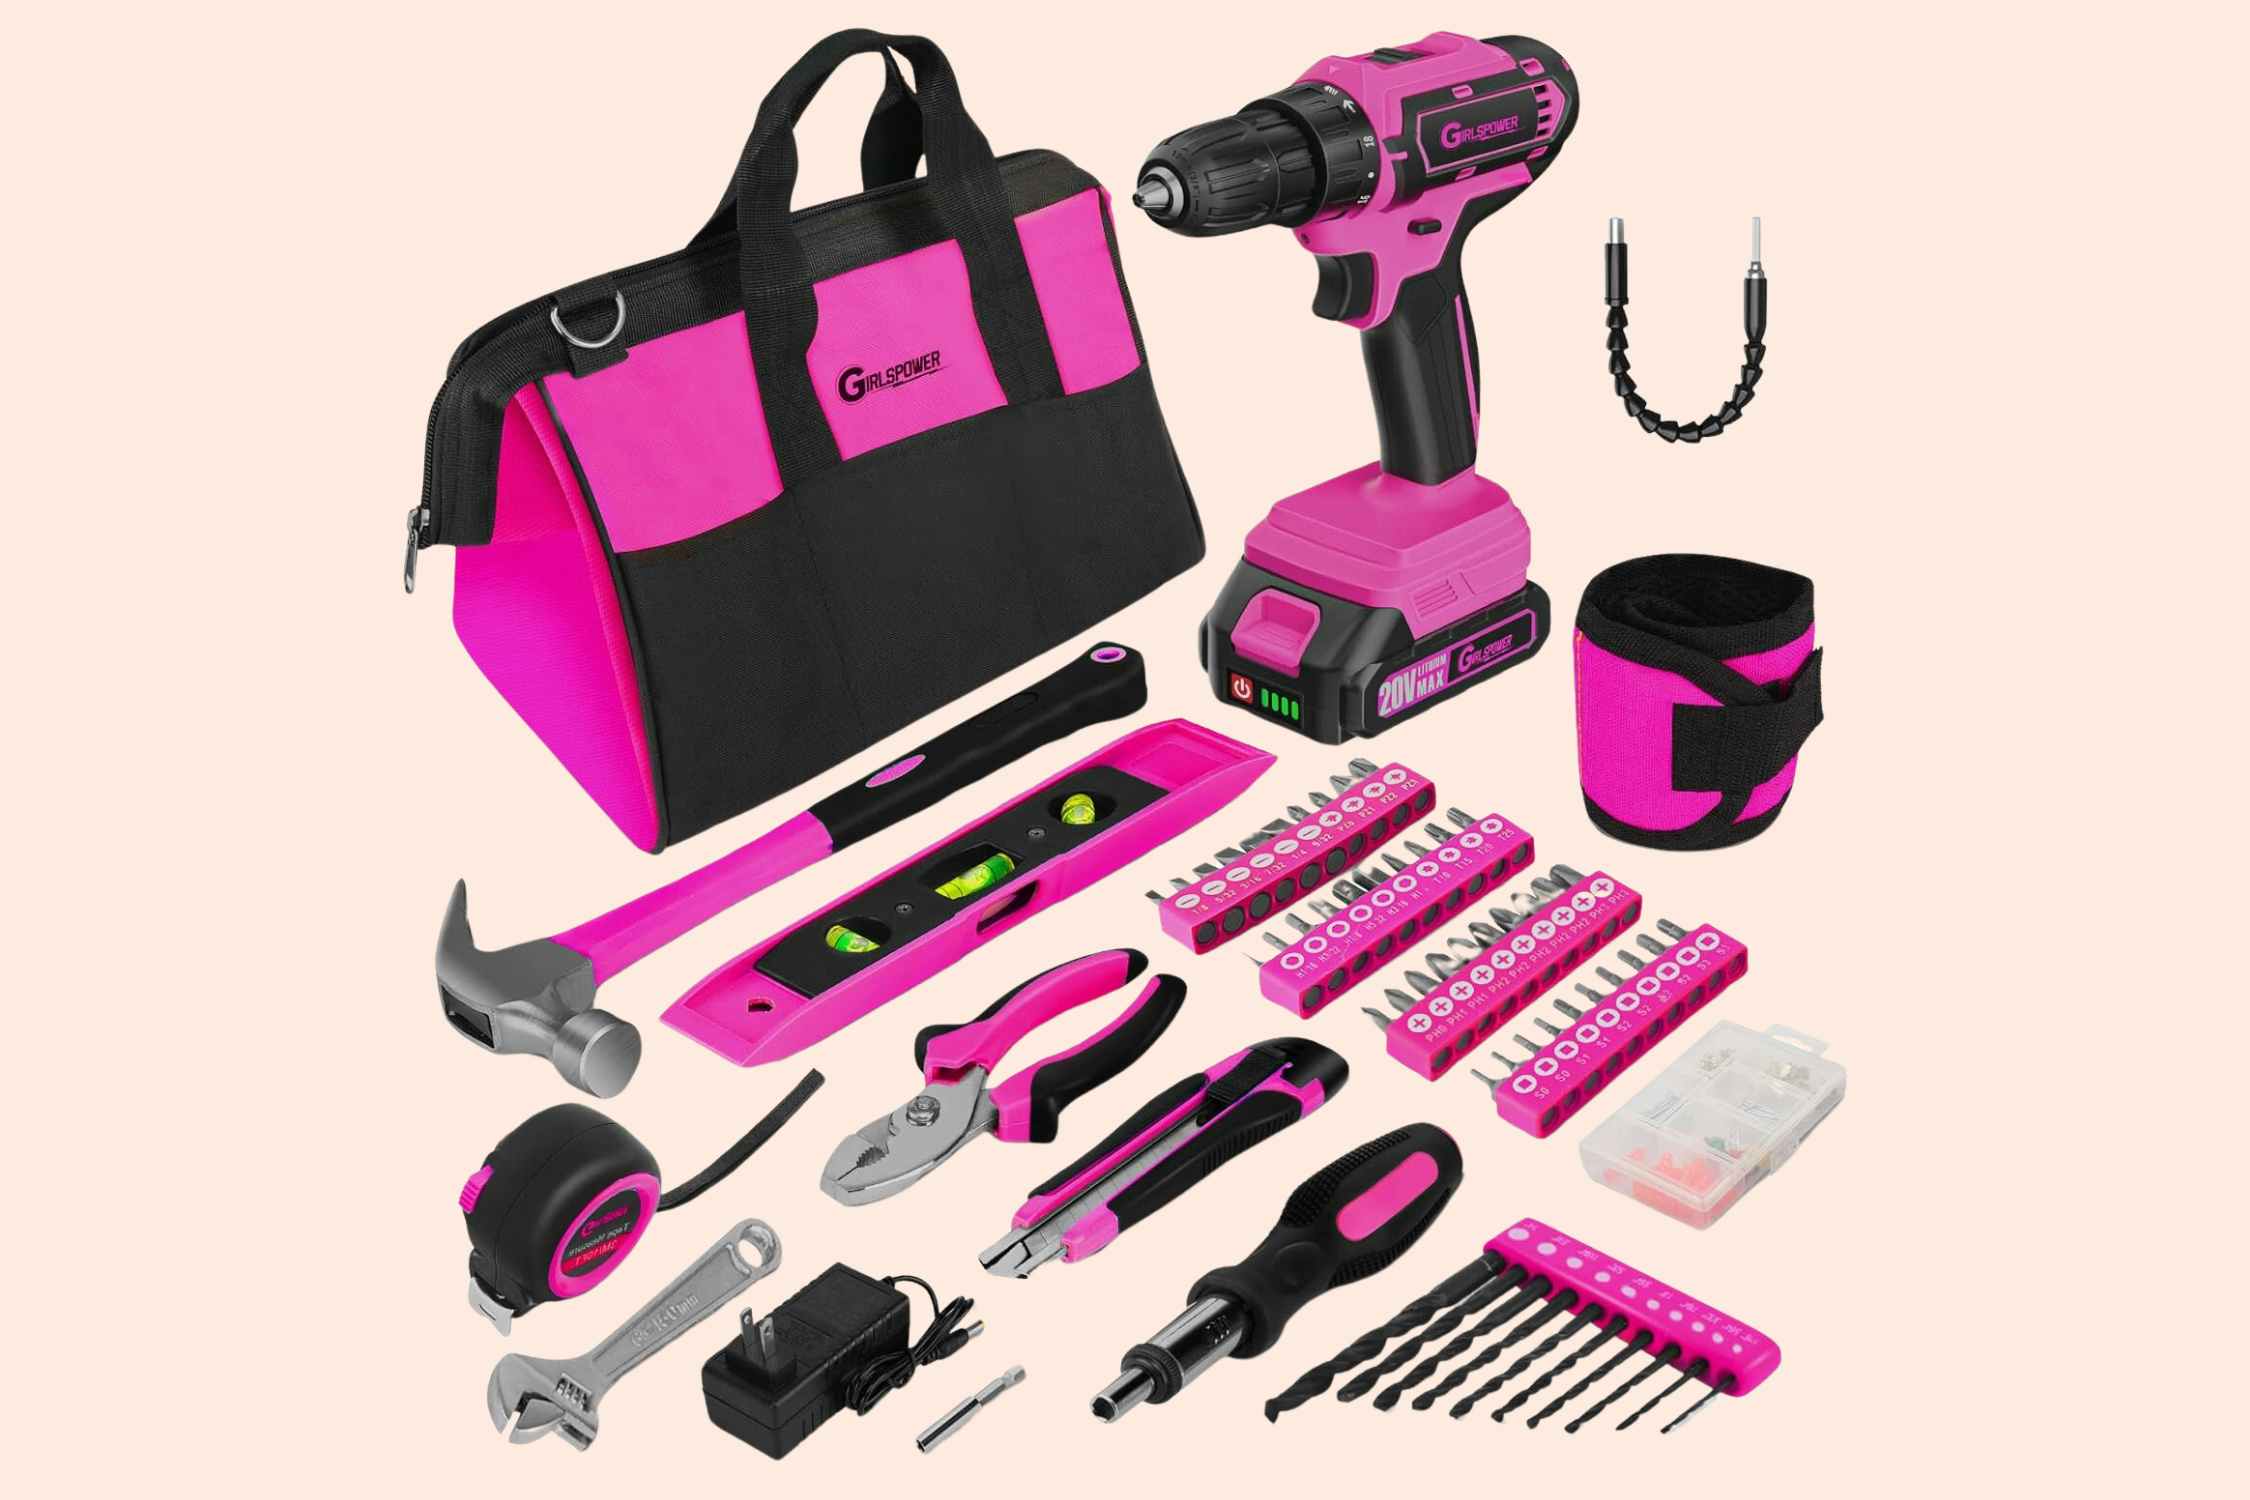 Pink Household 137-Piece Tool Kit, Priced at $15.29 on Amazon